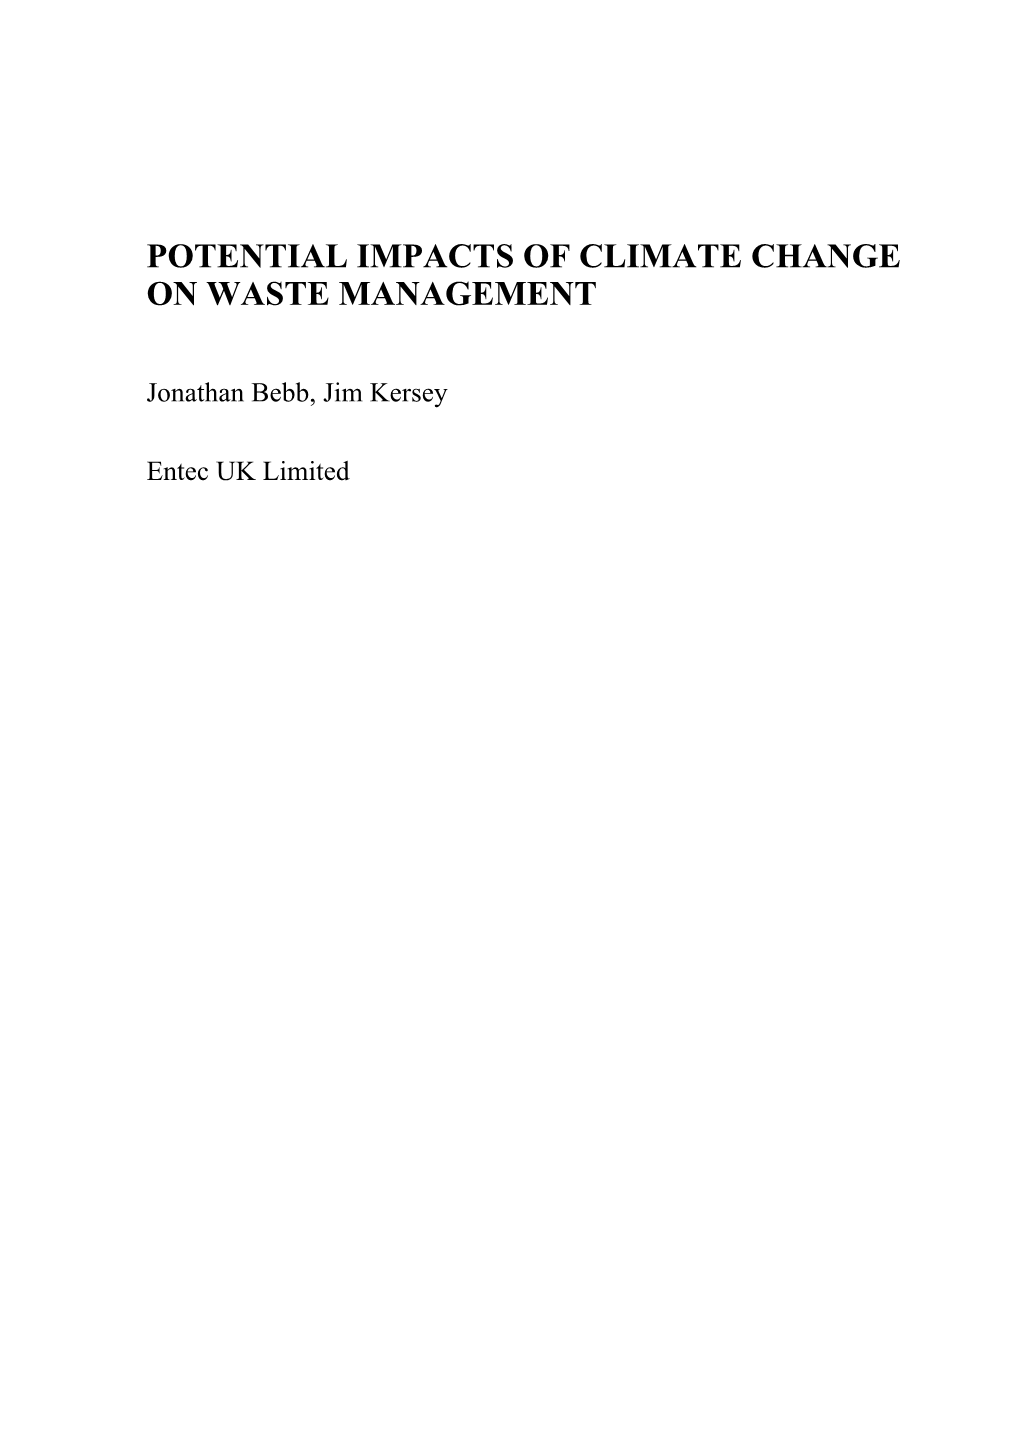 Potential Impacts of Climate Change on Waste Management